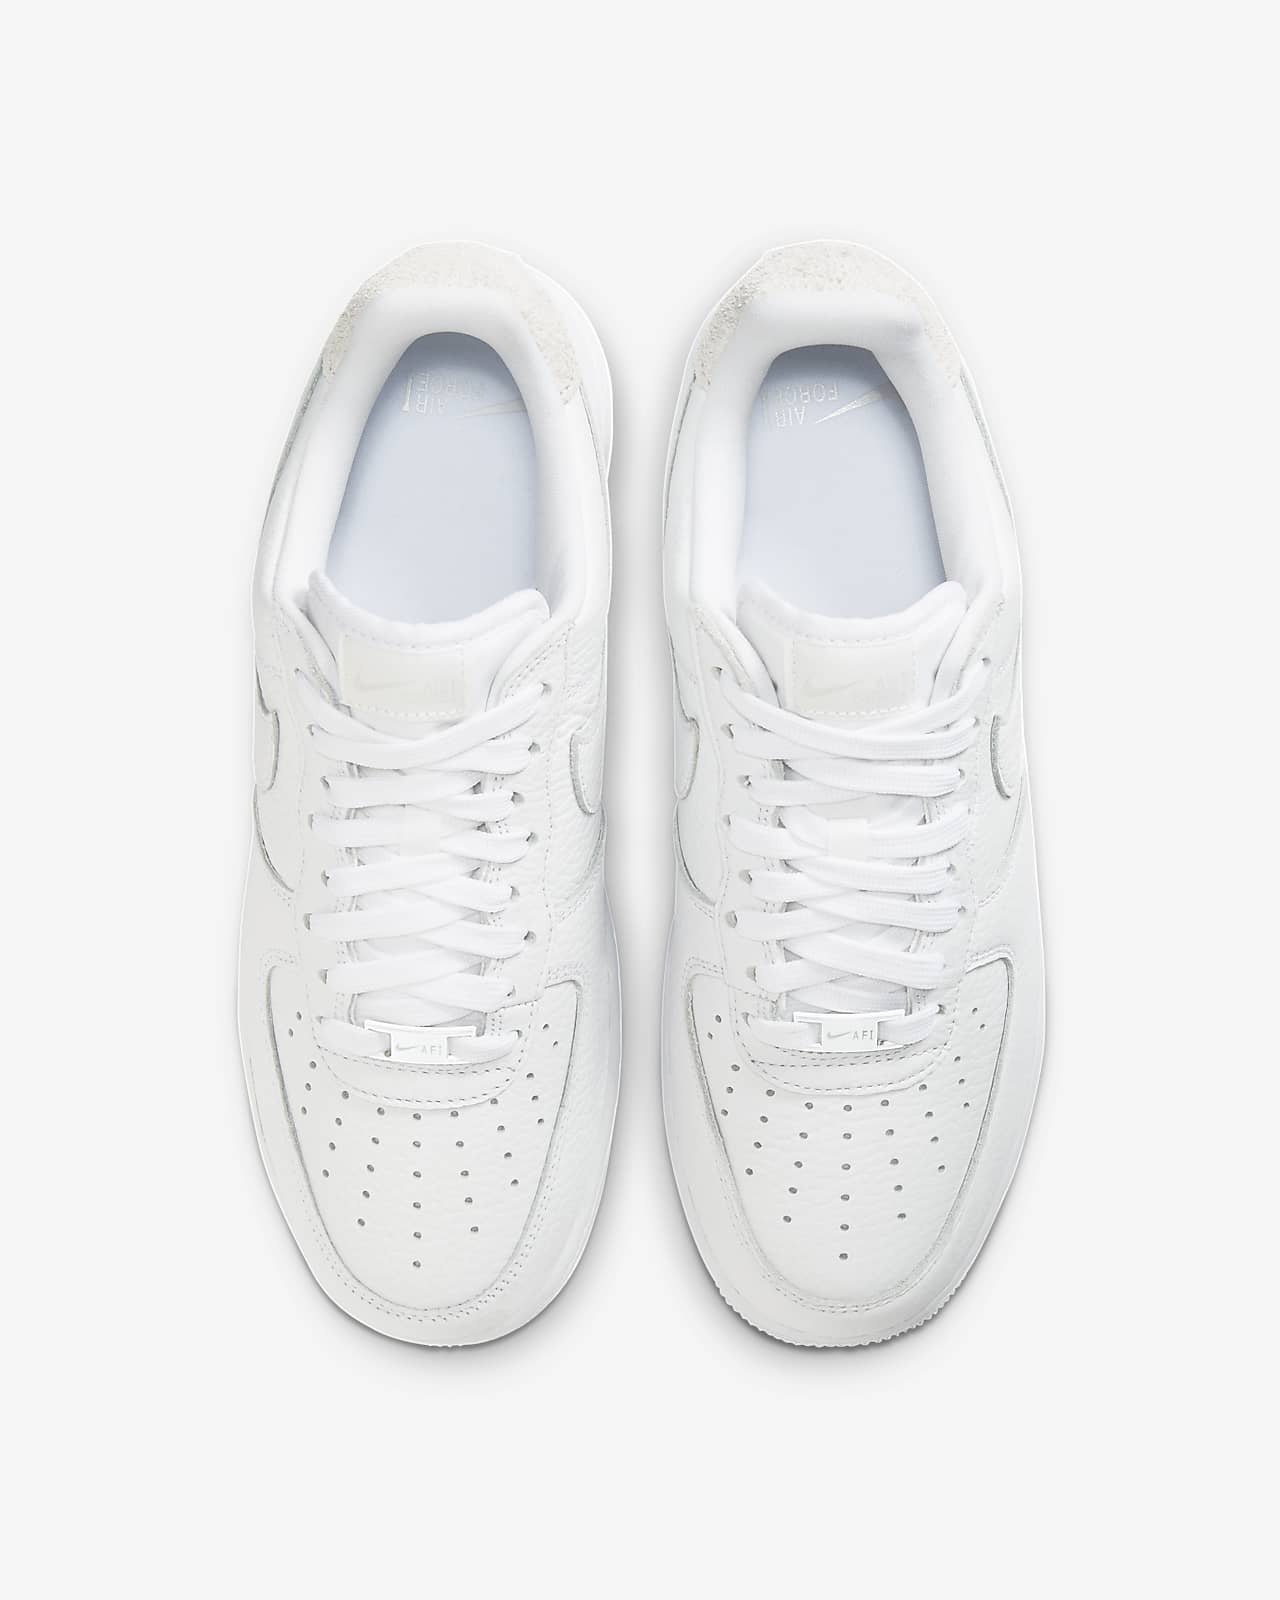 Nike Air Force 1 '07 Craft Men's Shoes